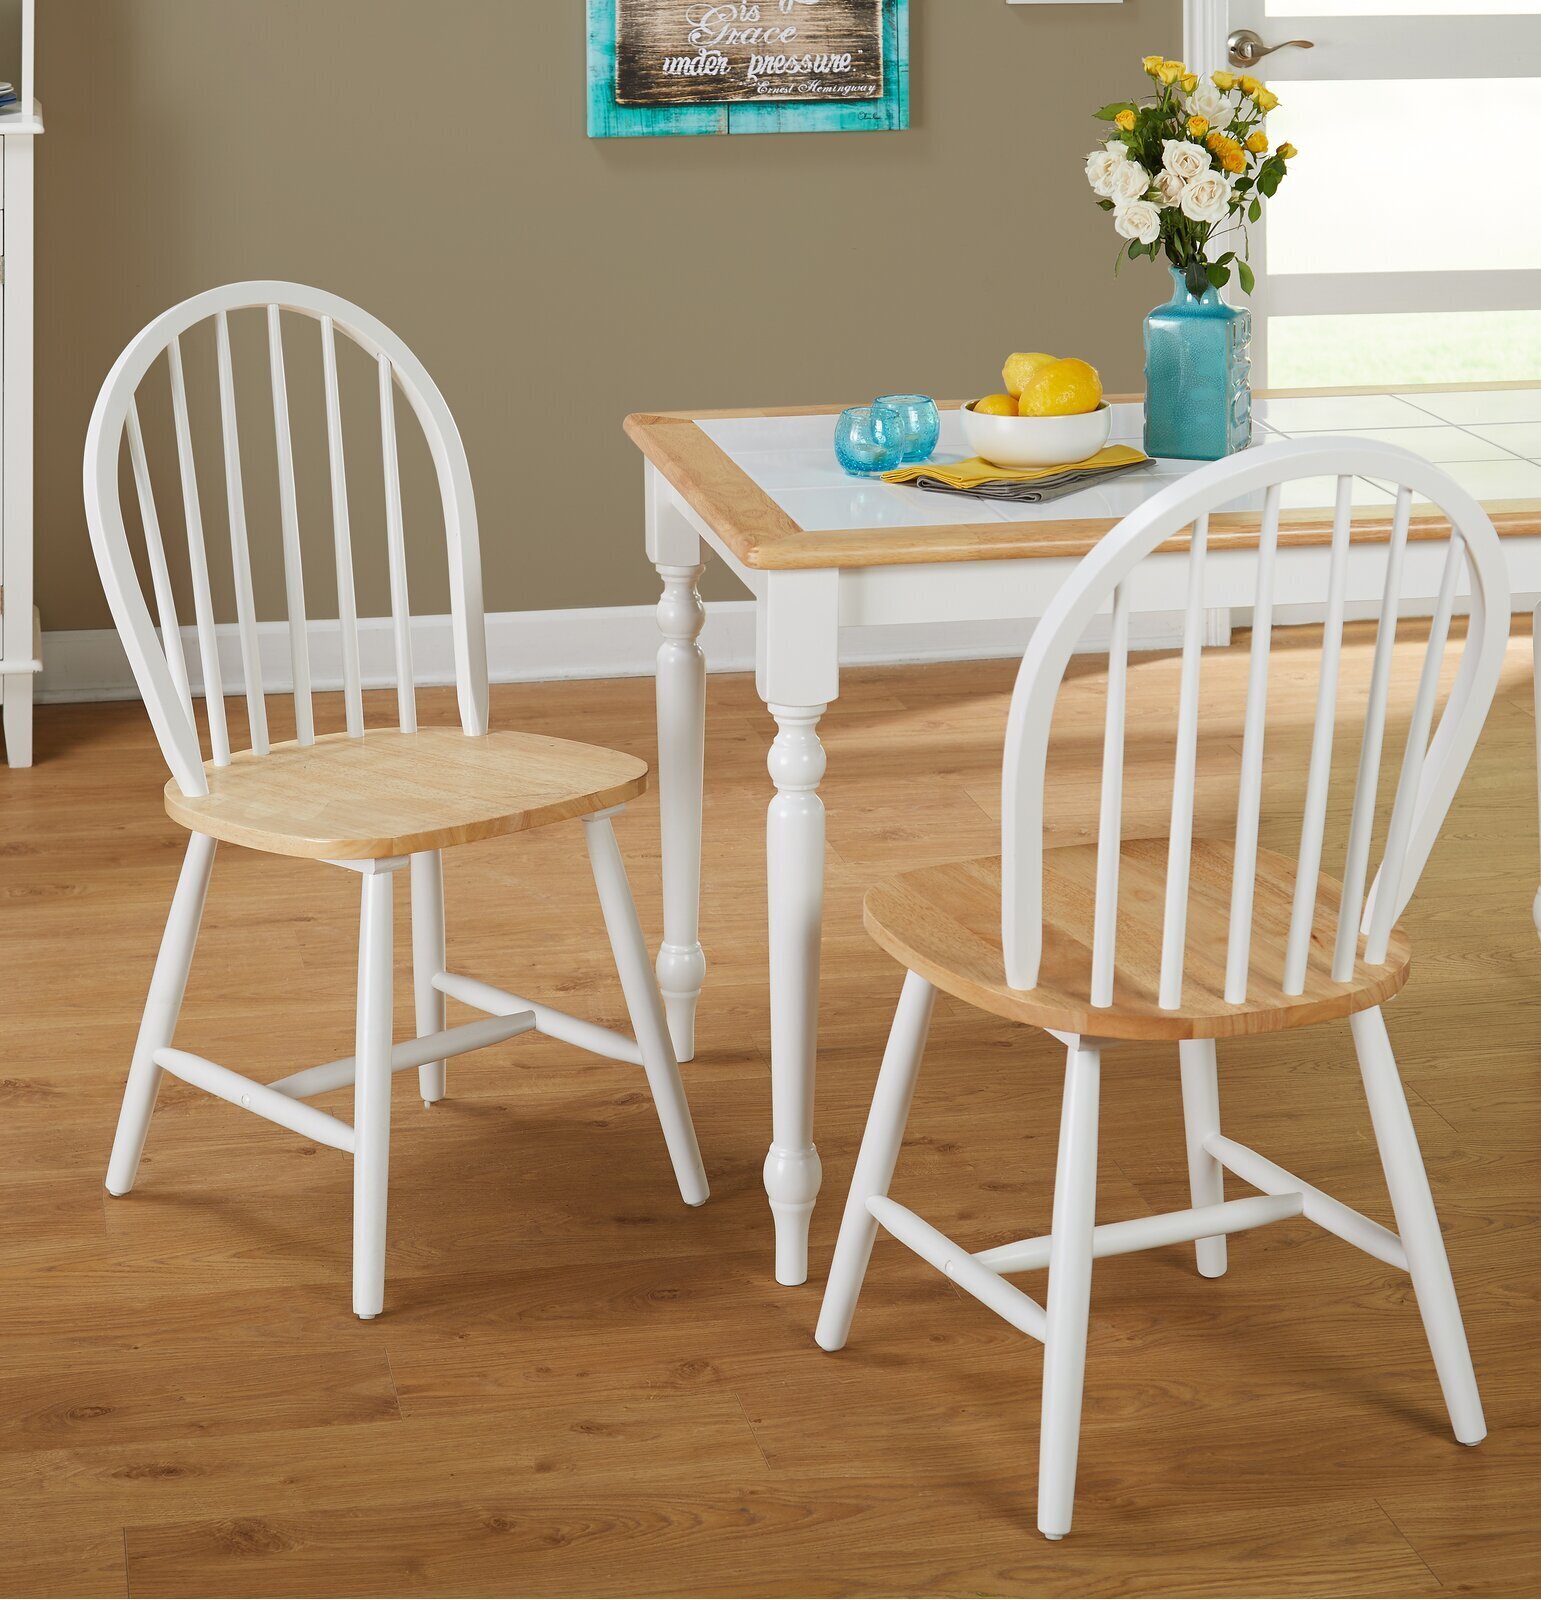 Farmhouse Style Wooden Chair With White Accents 